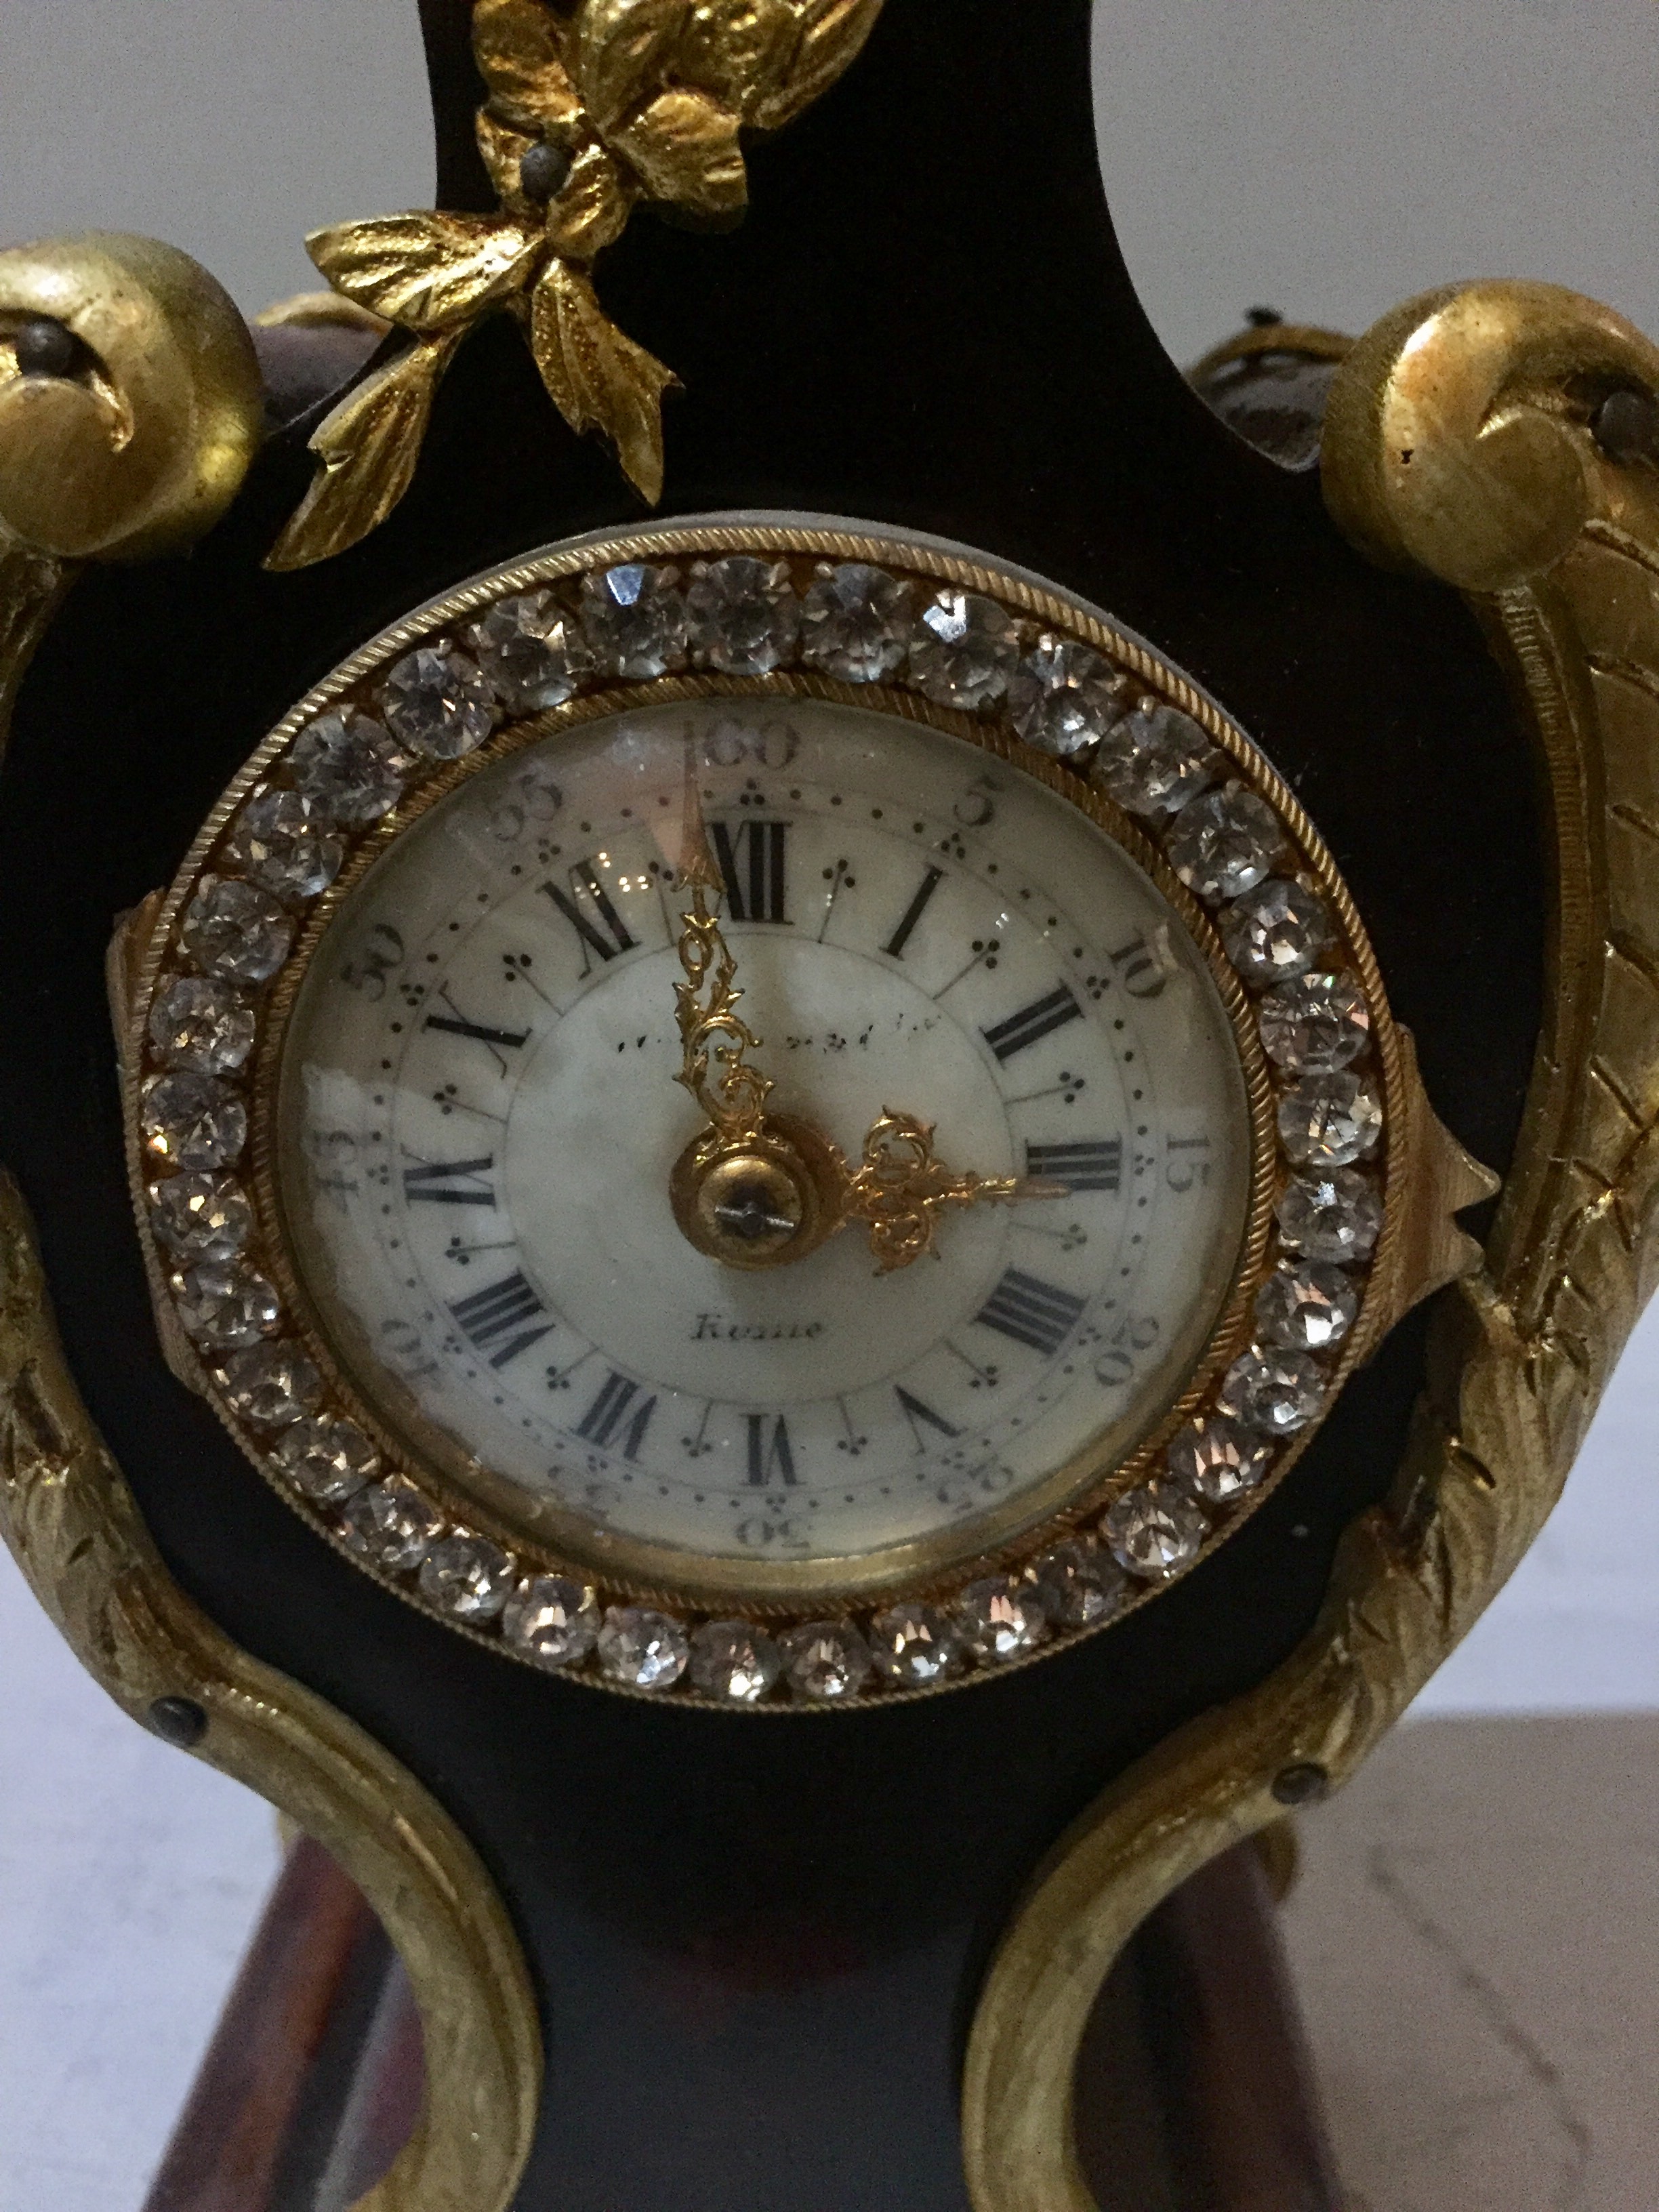 A 19TH CENTURY FRENCH GILT BRONZE AND TORTOISE SHELL LADIES' MANTLE CLOCK. (30cm x 10cm x 6cm) - Image 3 of 3